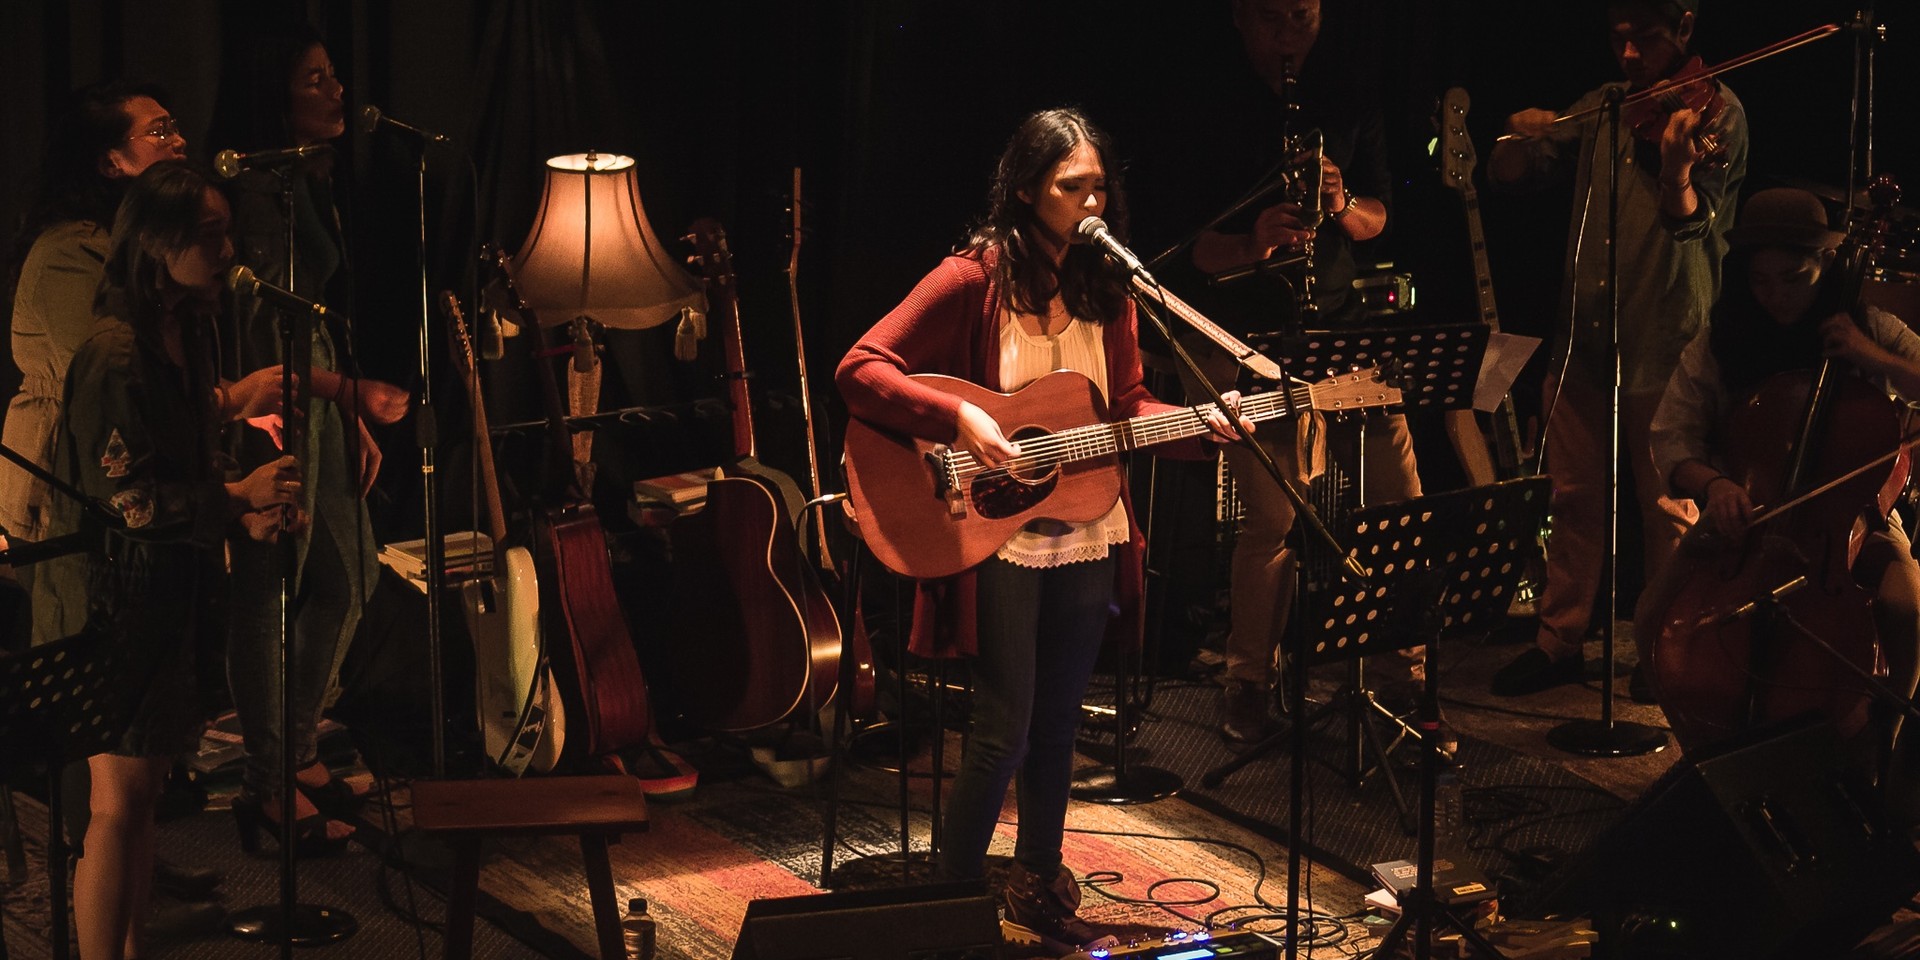 GIG REPORT: Stages Sessions x Clara Benin retraces all paths leading back home